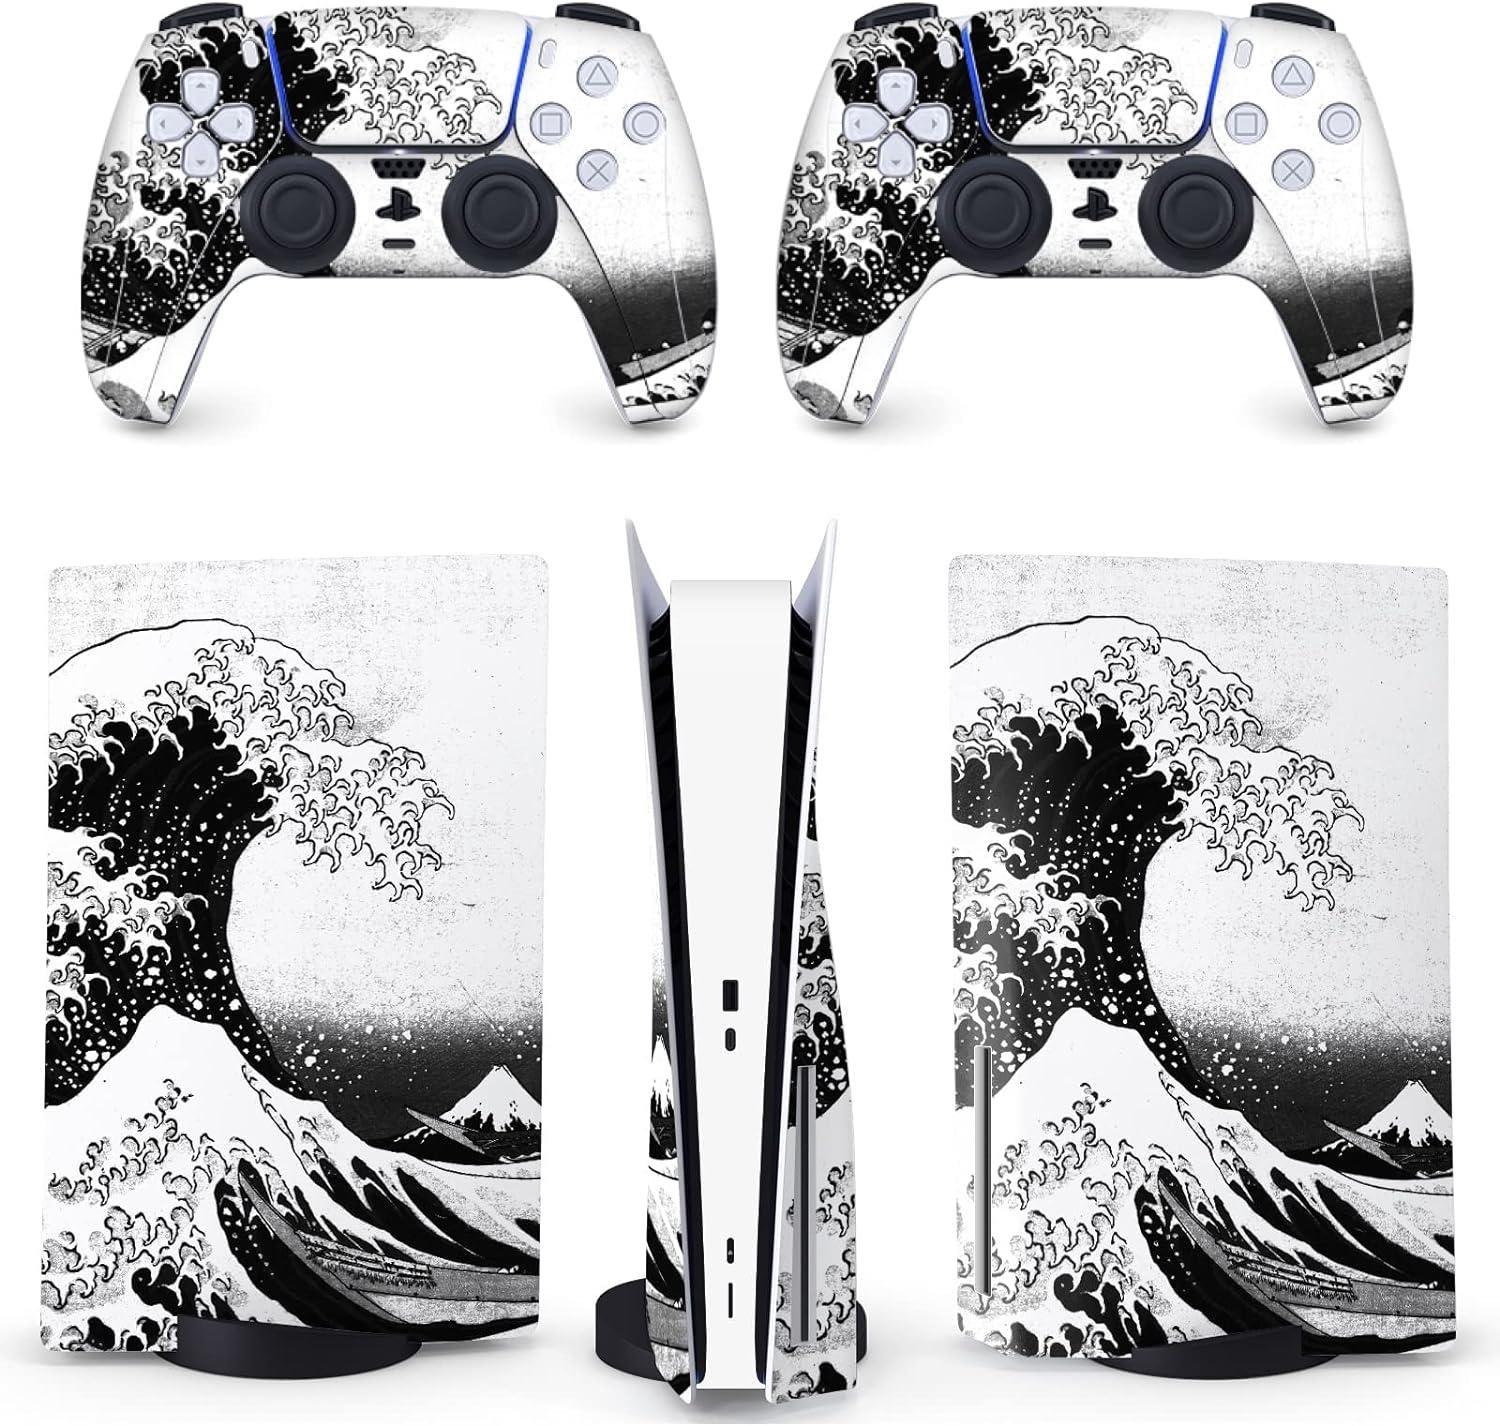 PS5 Wave Japanese Skin | Painting Great Kanagawa Vinyl Cover Wrap Sticker Full Set Console Controller | Compatible with Sony Playstation 5 Disc